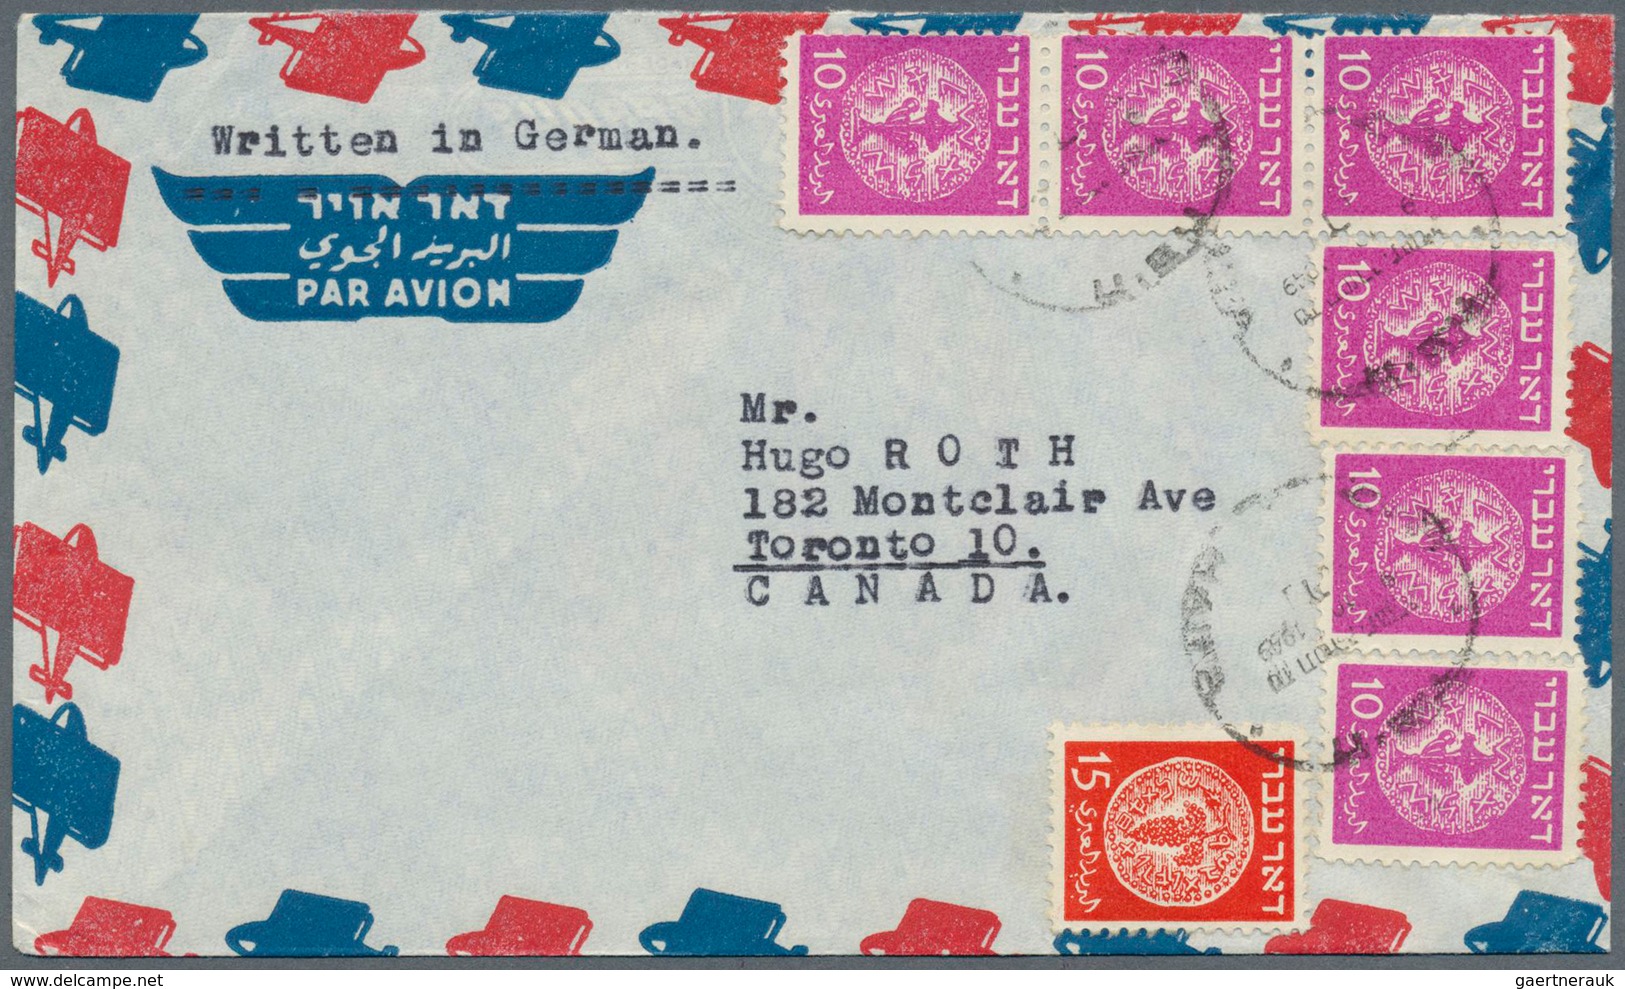 22849 Israel: 1948/1965, holding of apprx. 280 entires with commercial mail and philatelic covers, main va